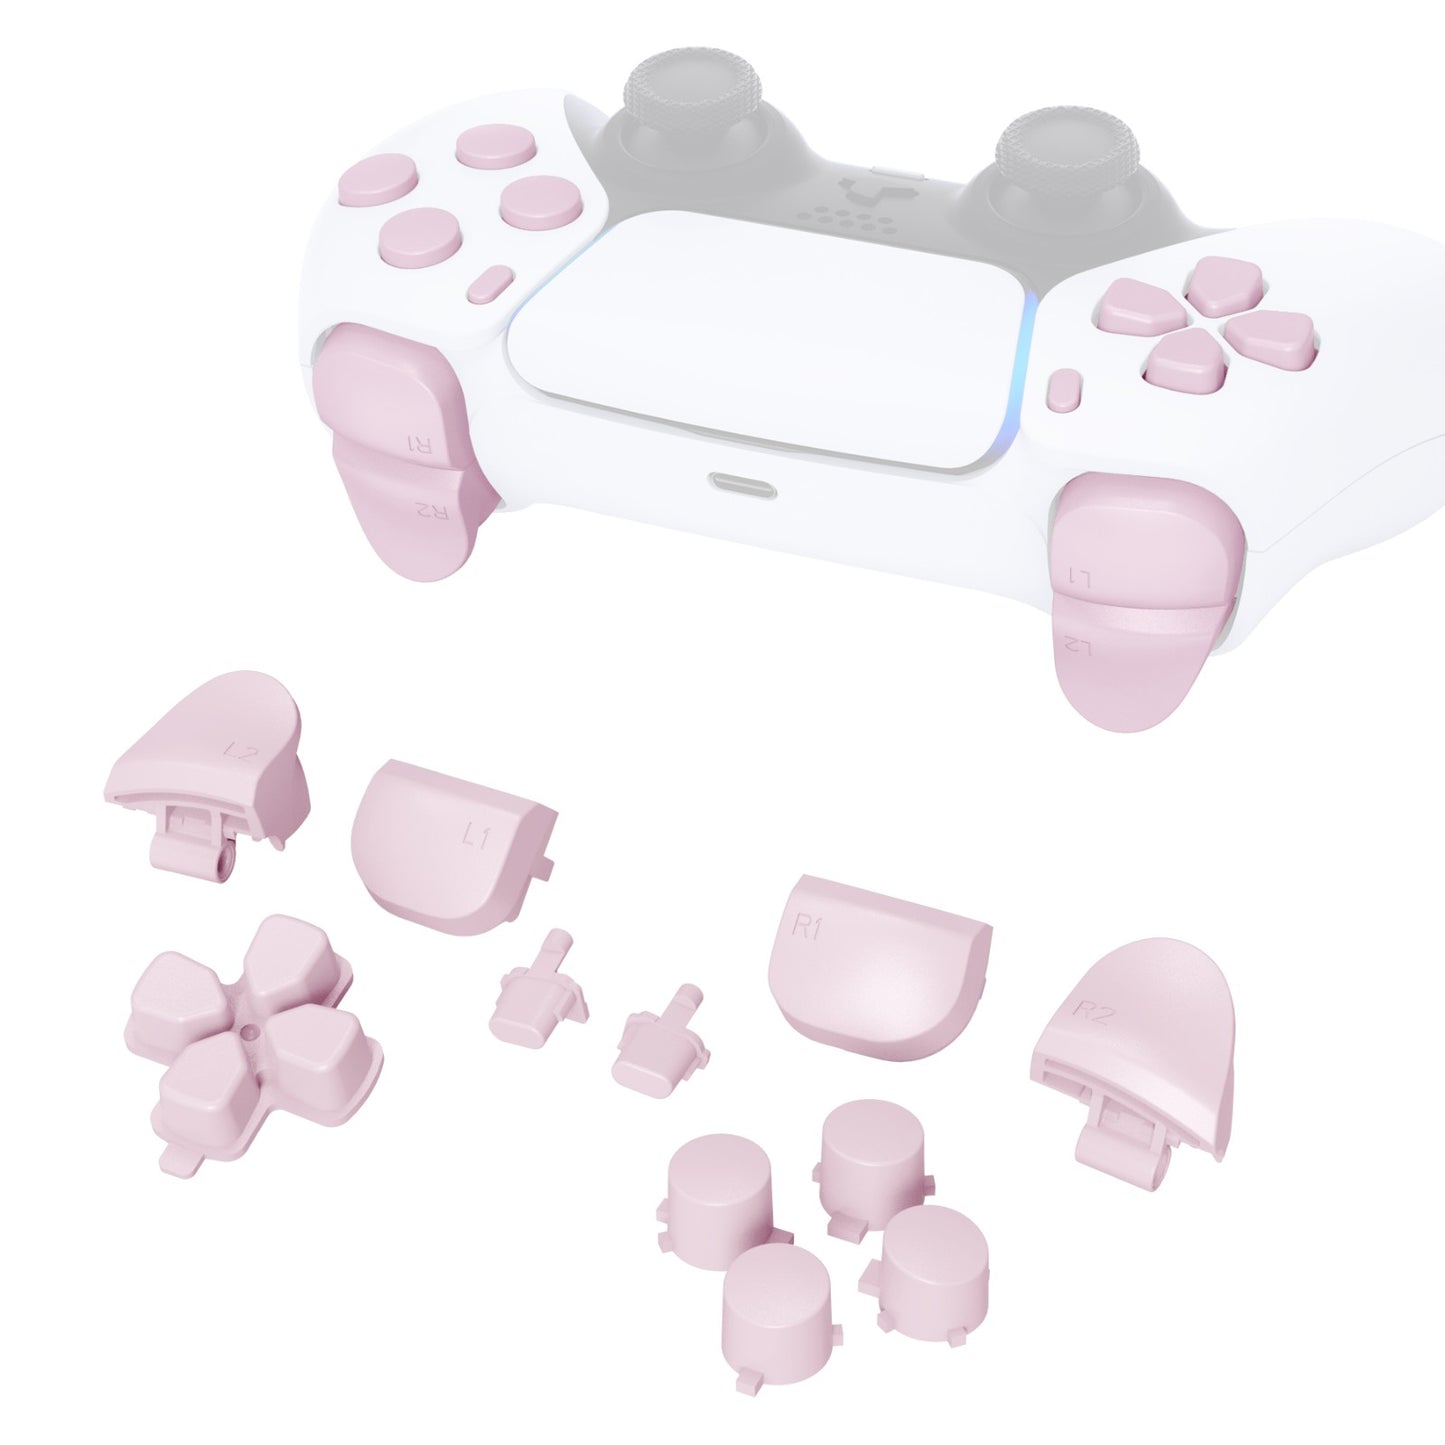 eXtremeRate Retail Replacement D-pad R1 L1 R2 L2 Triggers Share Options Face Buttons, Cherry Blossoms Pink Full Set Buttons Compatible with ps5 Controller BDM-010 & BDM-020 - JPF1012G2